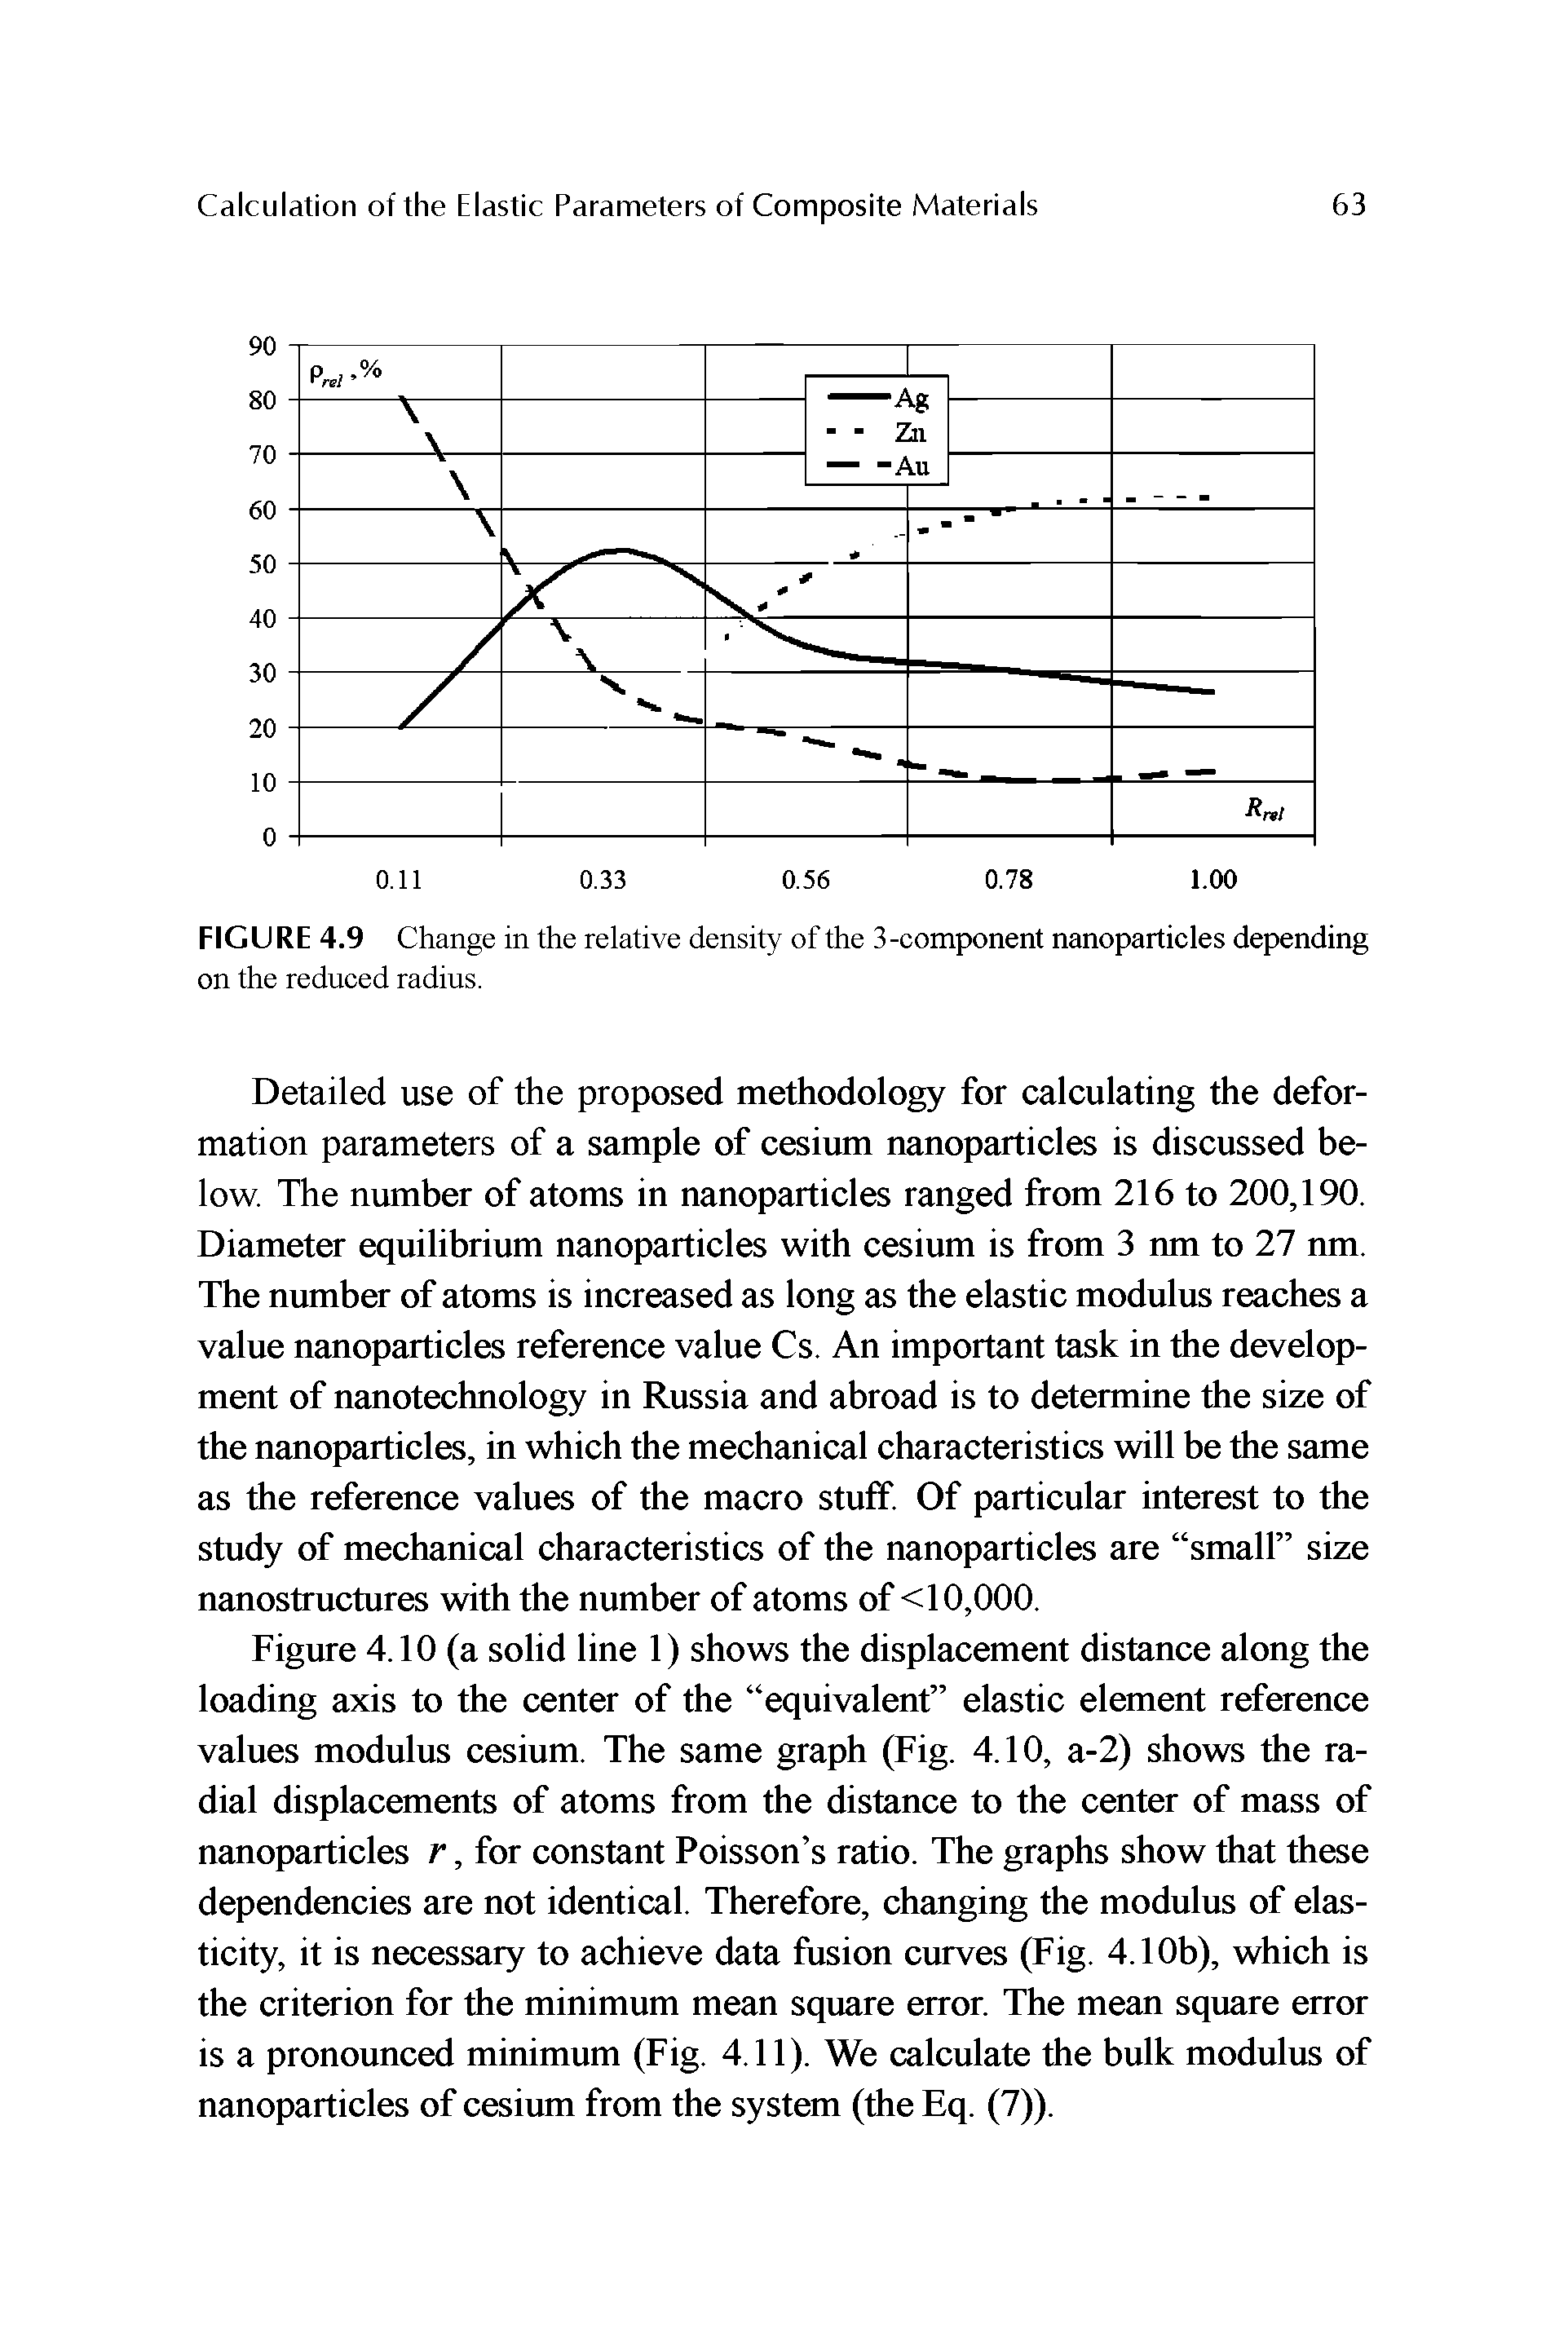 Figure 4.10 (a solid line 1) shows the displacement distance along the loading axis to the center of the equivalent elastic element reference values modulus cesium. The same graph (Fig. 4.10, a-2) shows the radial displacements of atoms from the distance to the center of mass of nanoparticles r, for constant Poisson s ratio. The graphs show that these dependencies are not identical. Therefore, changing the modulus of elasticity, it is necessary to achieve data fusion curves (Fig. 4.10b), which is the criterion for the minimum mean square error. The mean square error is a pronounced minimum (Fig. 4.11). We calculate the bulk modulus of nanoparticles of cesium from the system (the Eq. (7)).